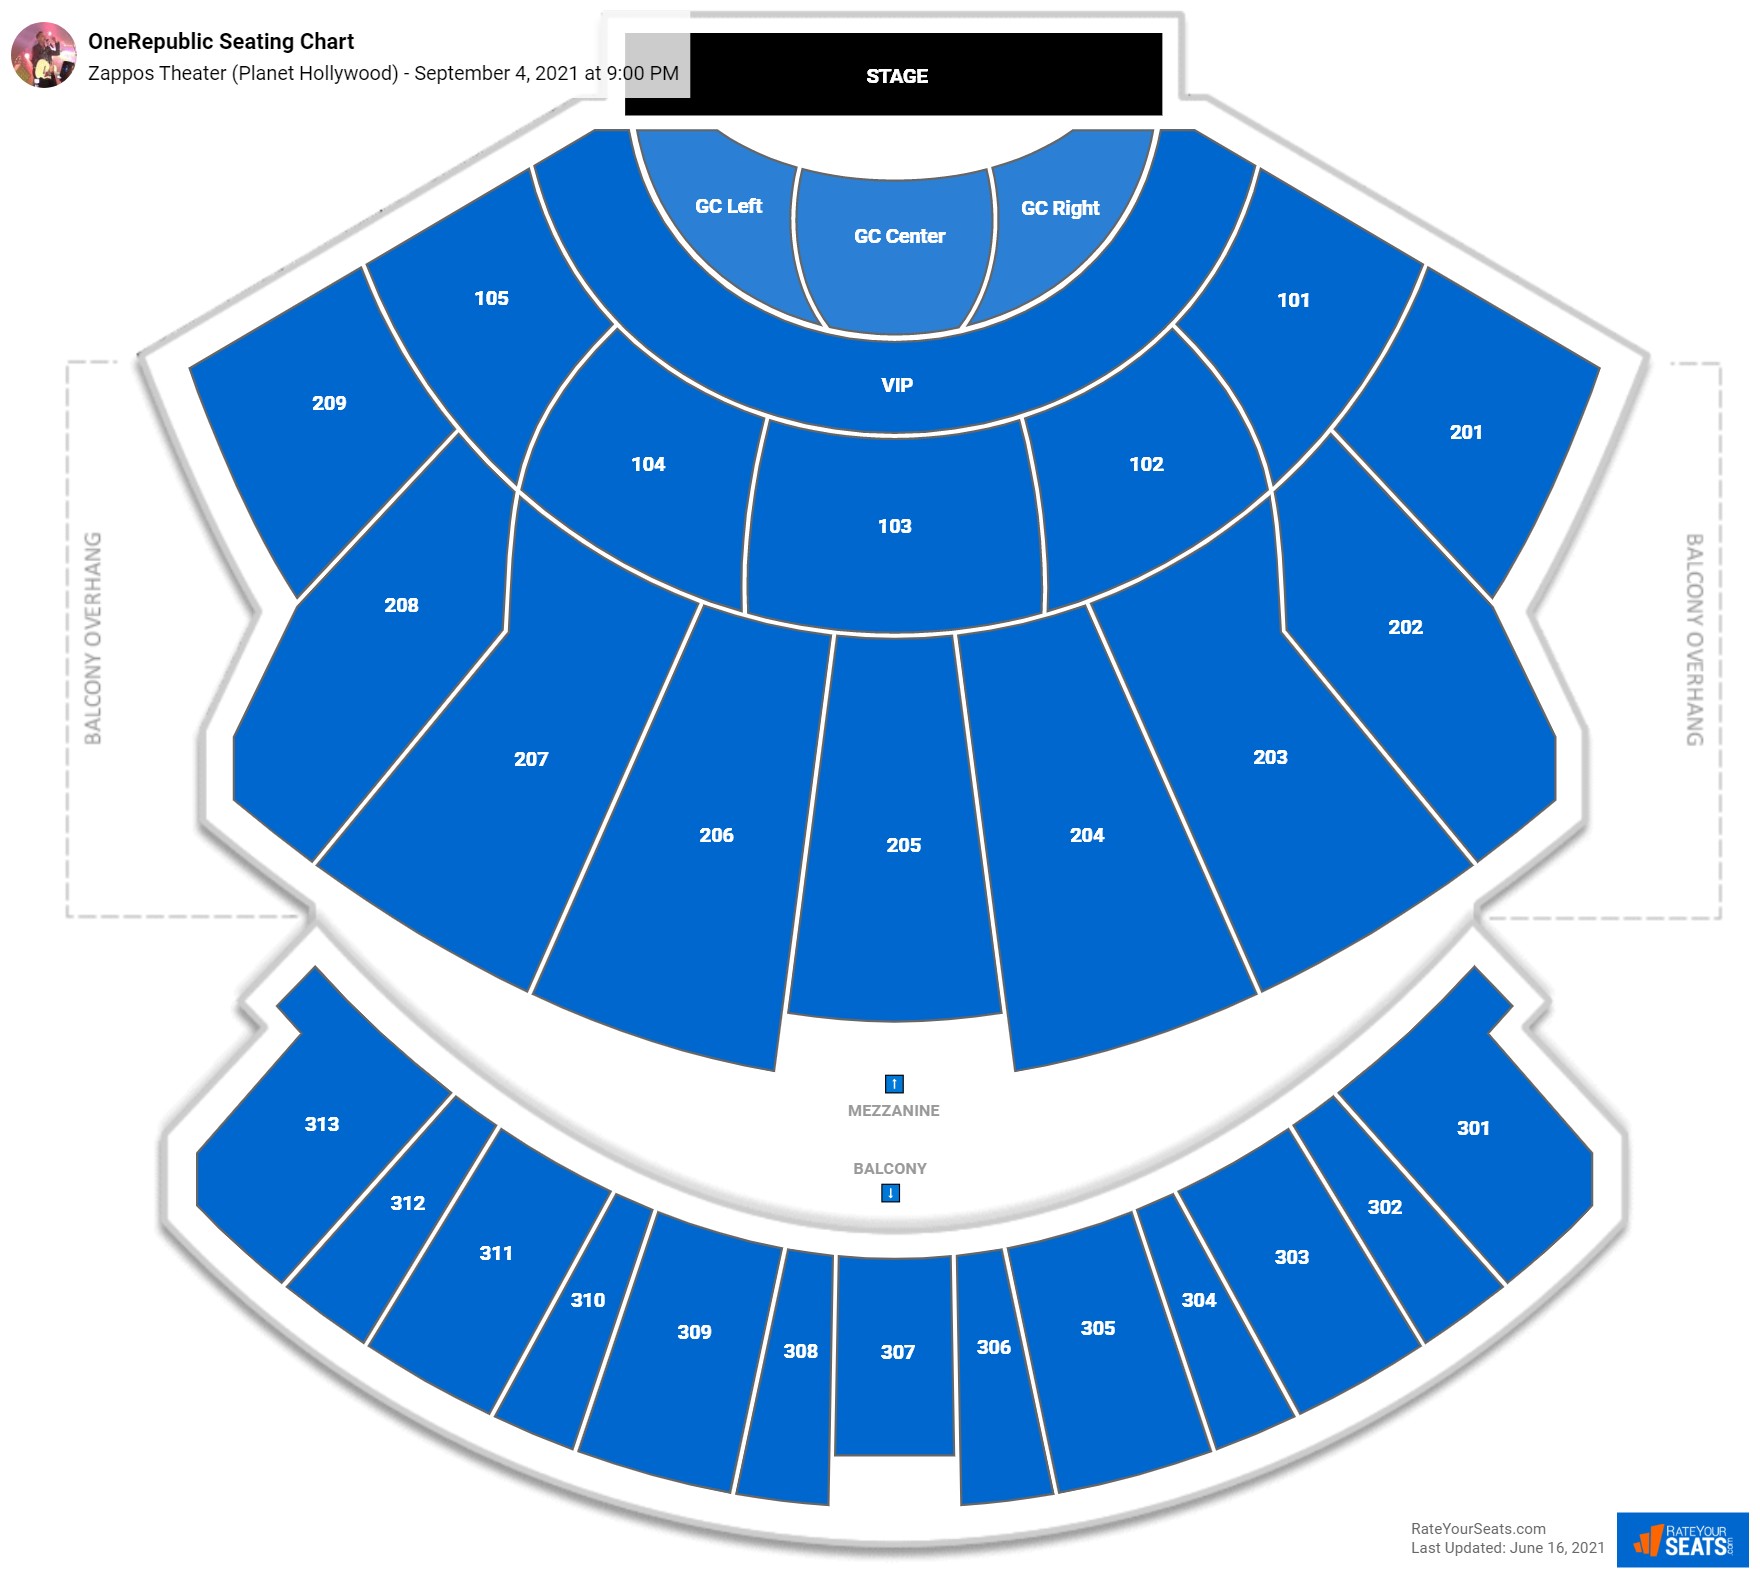 Zappos Theater Seating Chart